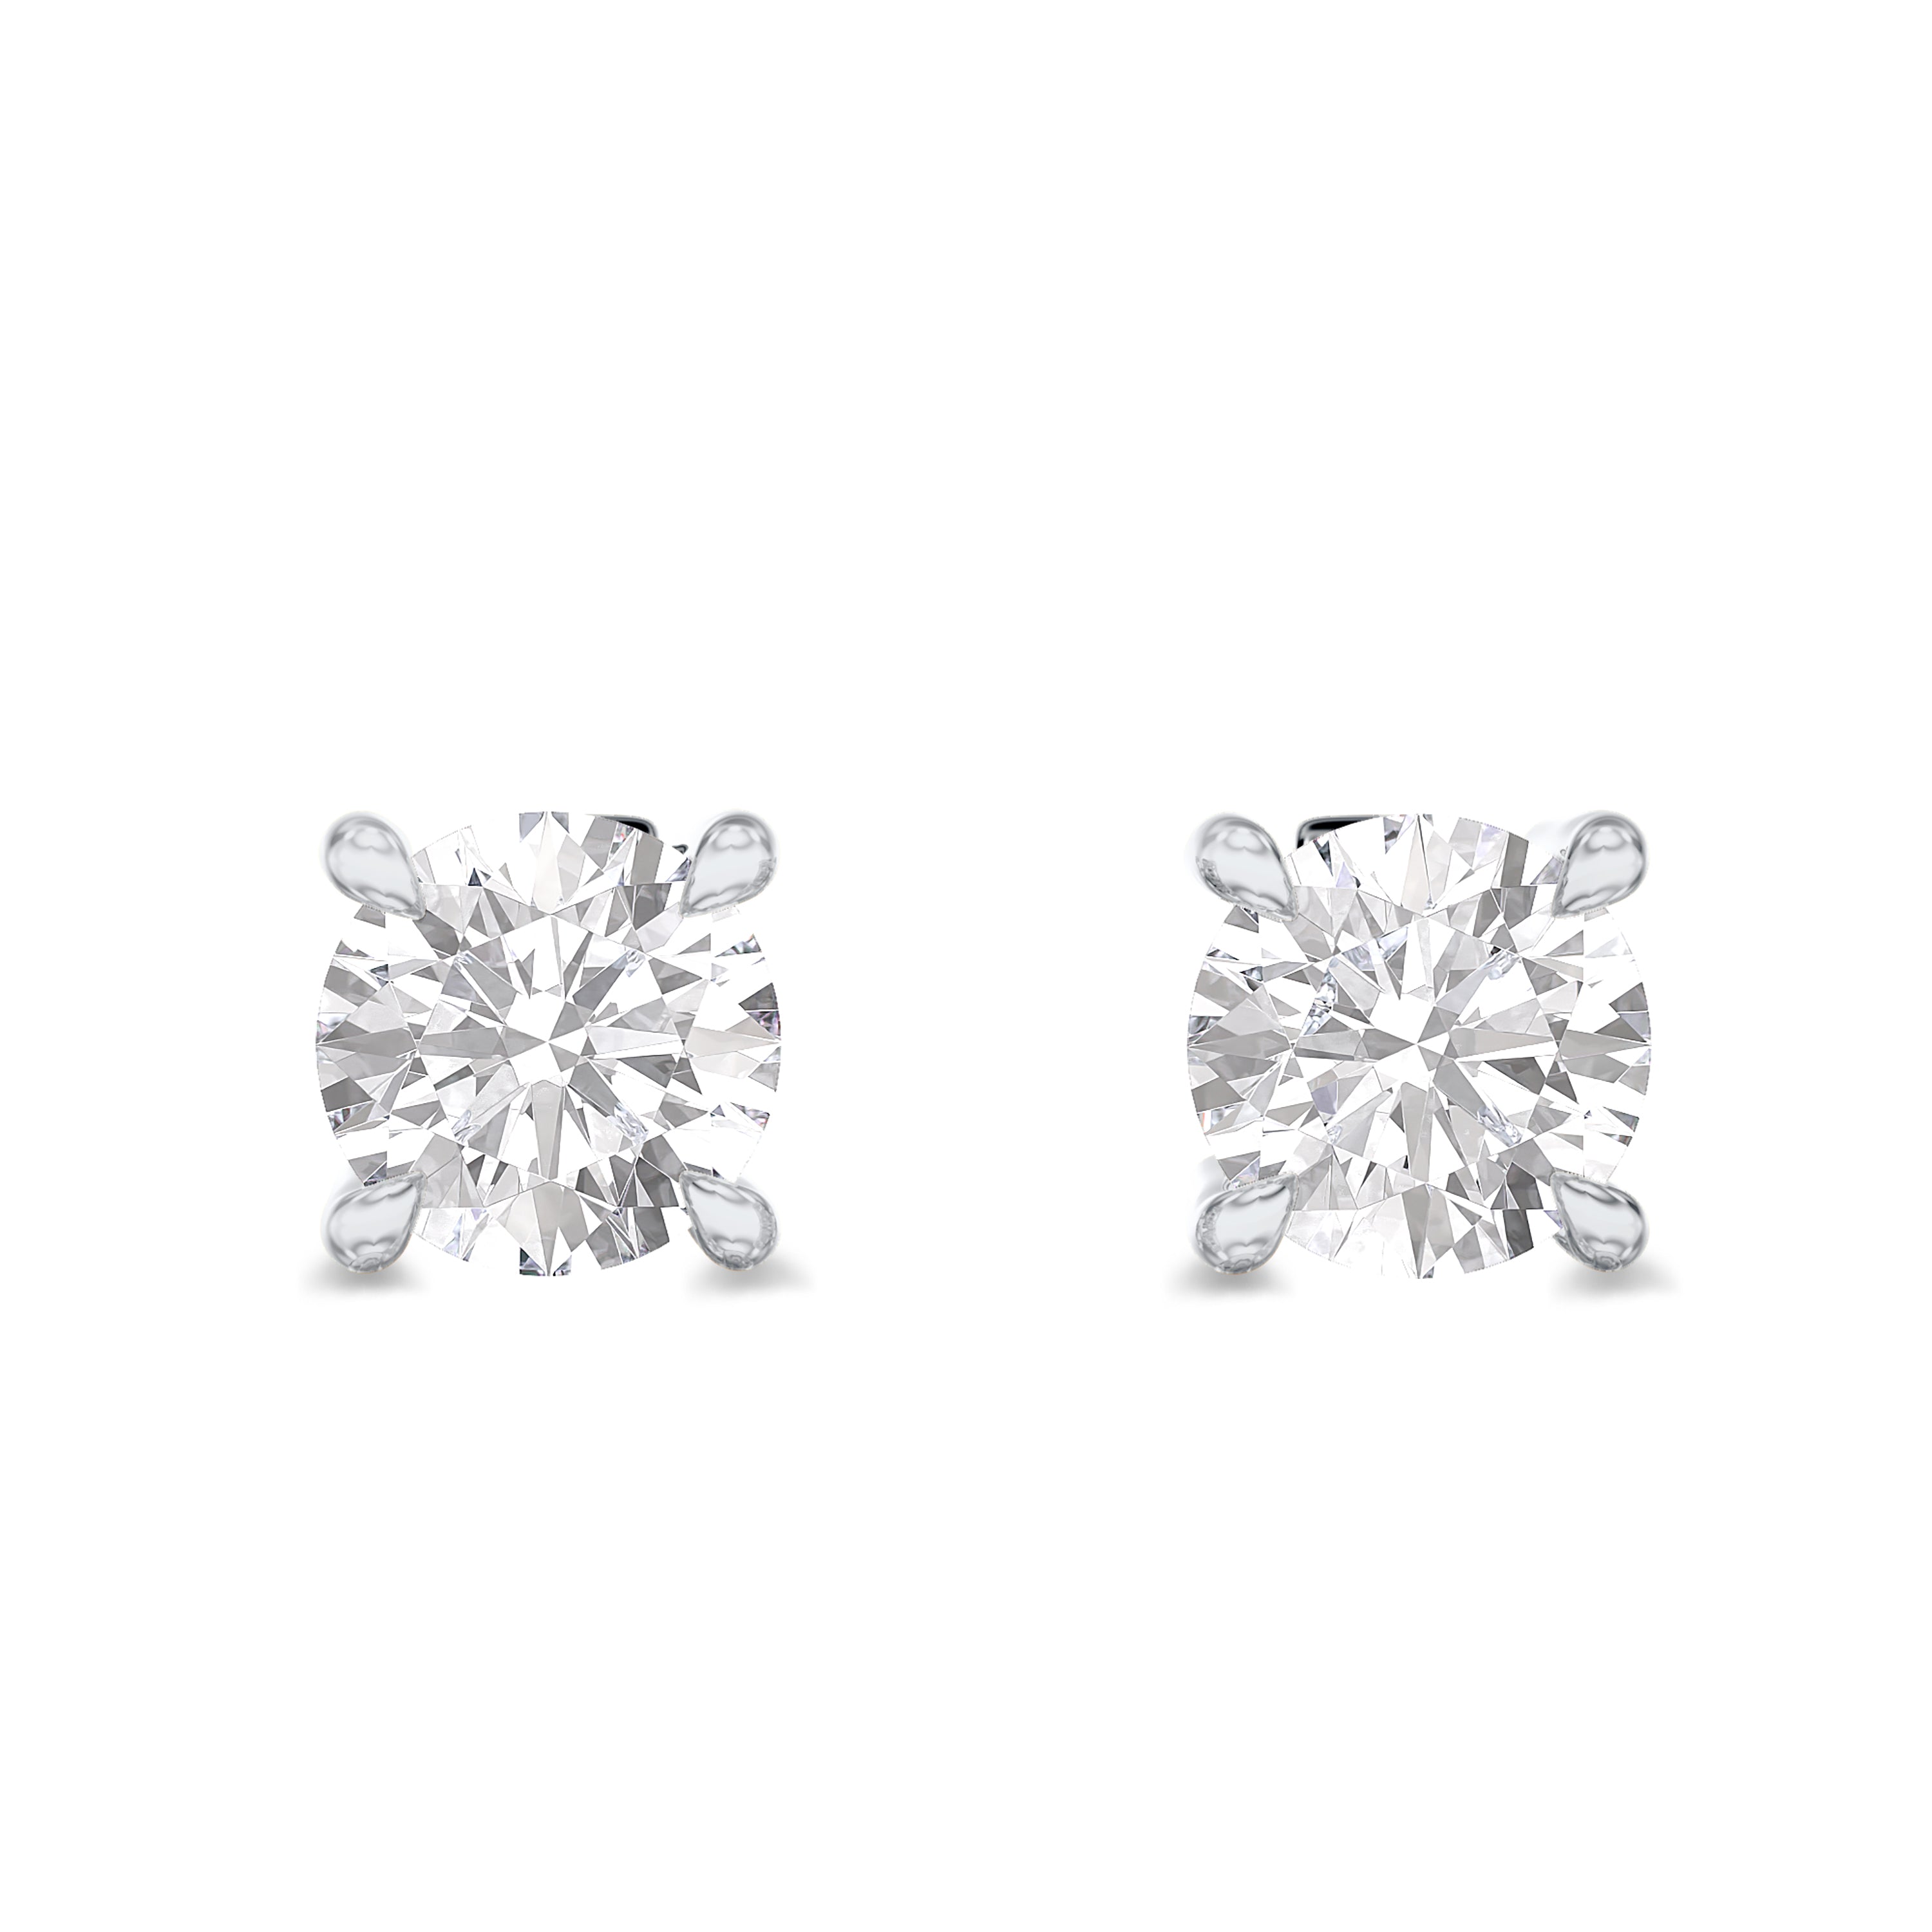 0.80 carat solitaire diamond earrings in 18K white gold, GH color and SI clarity